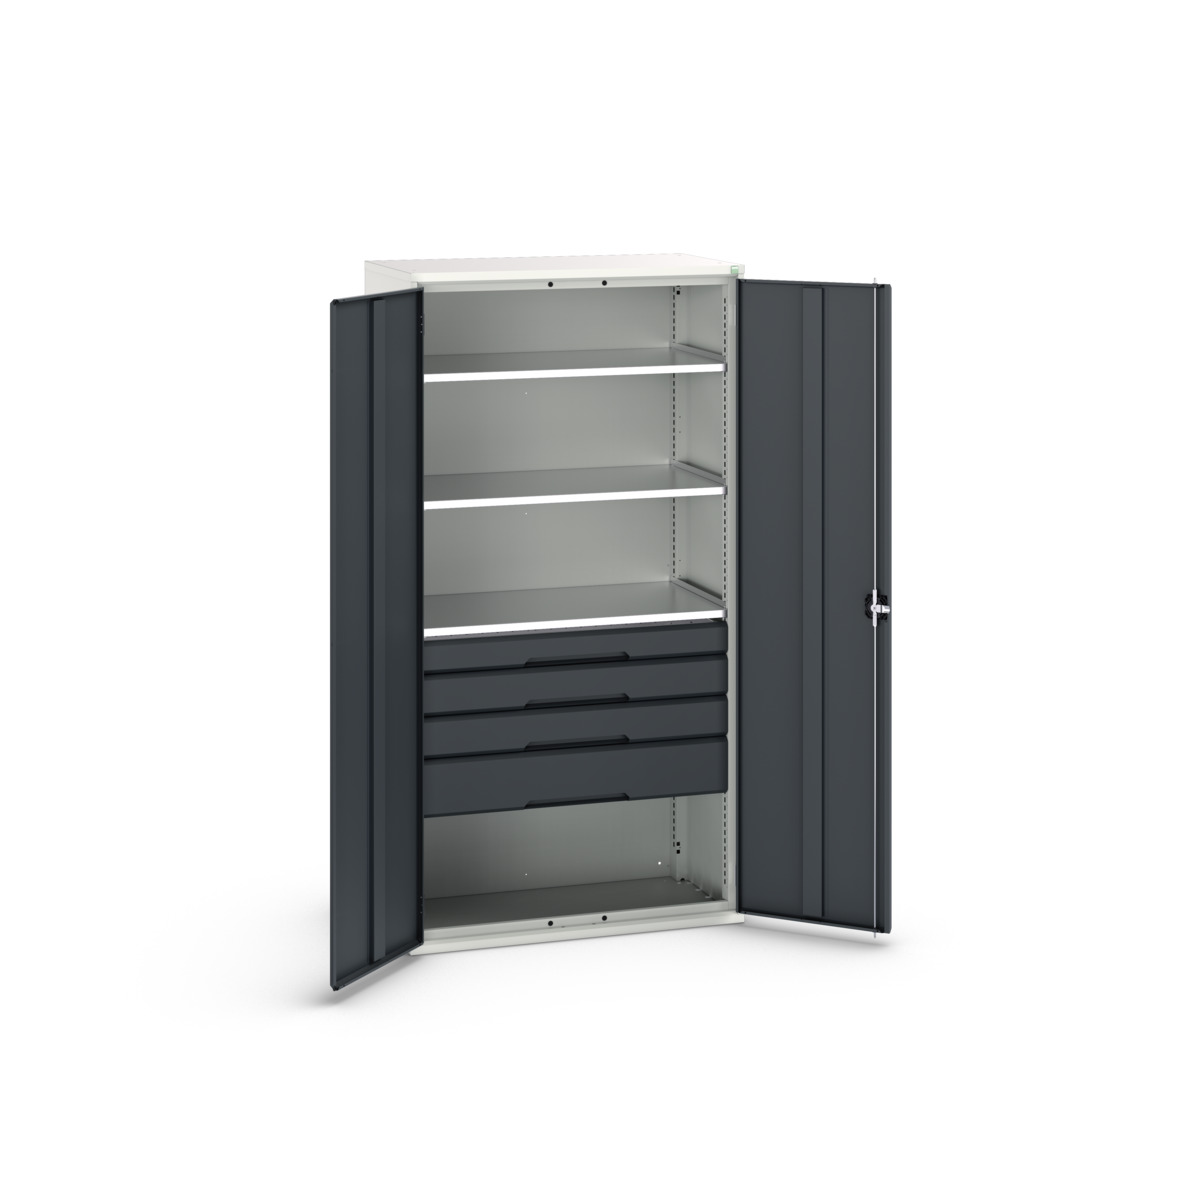 16926576. - verso kitted cupboard